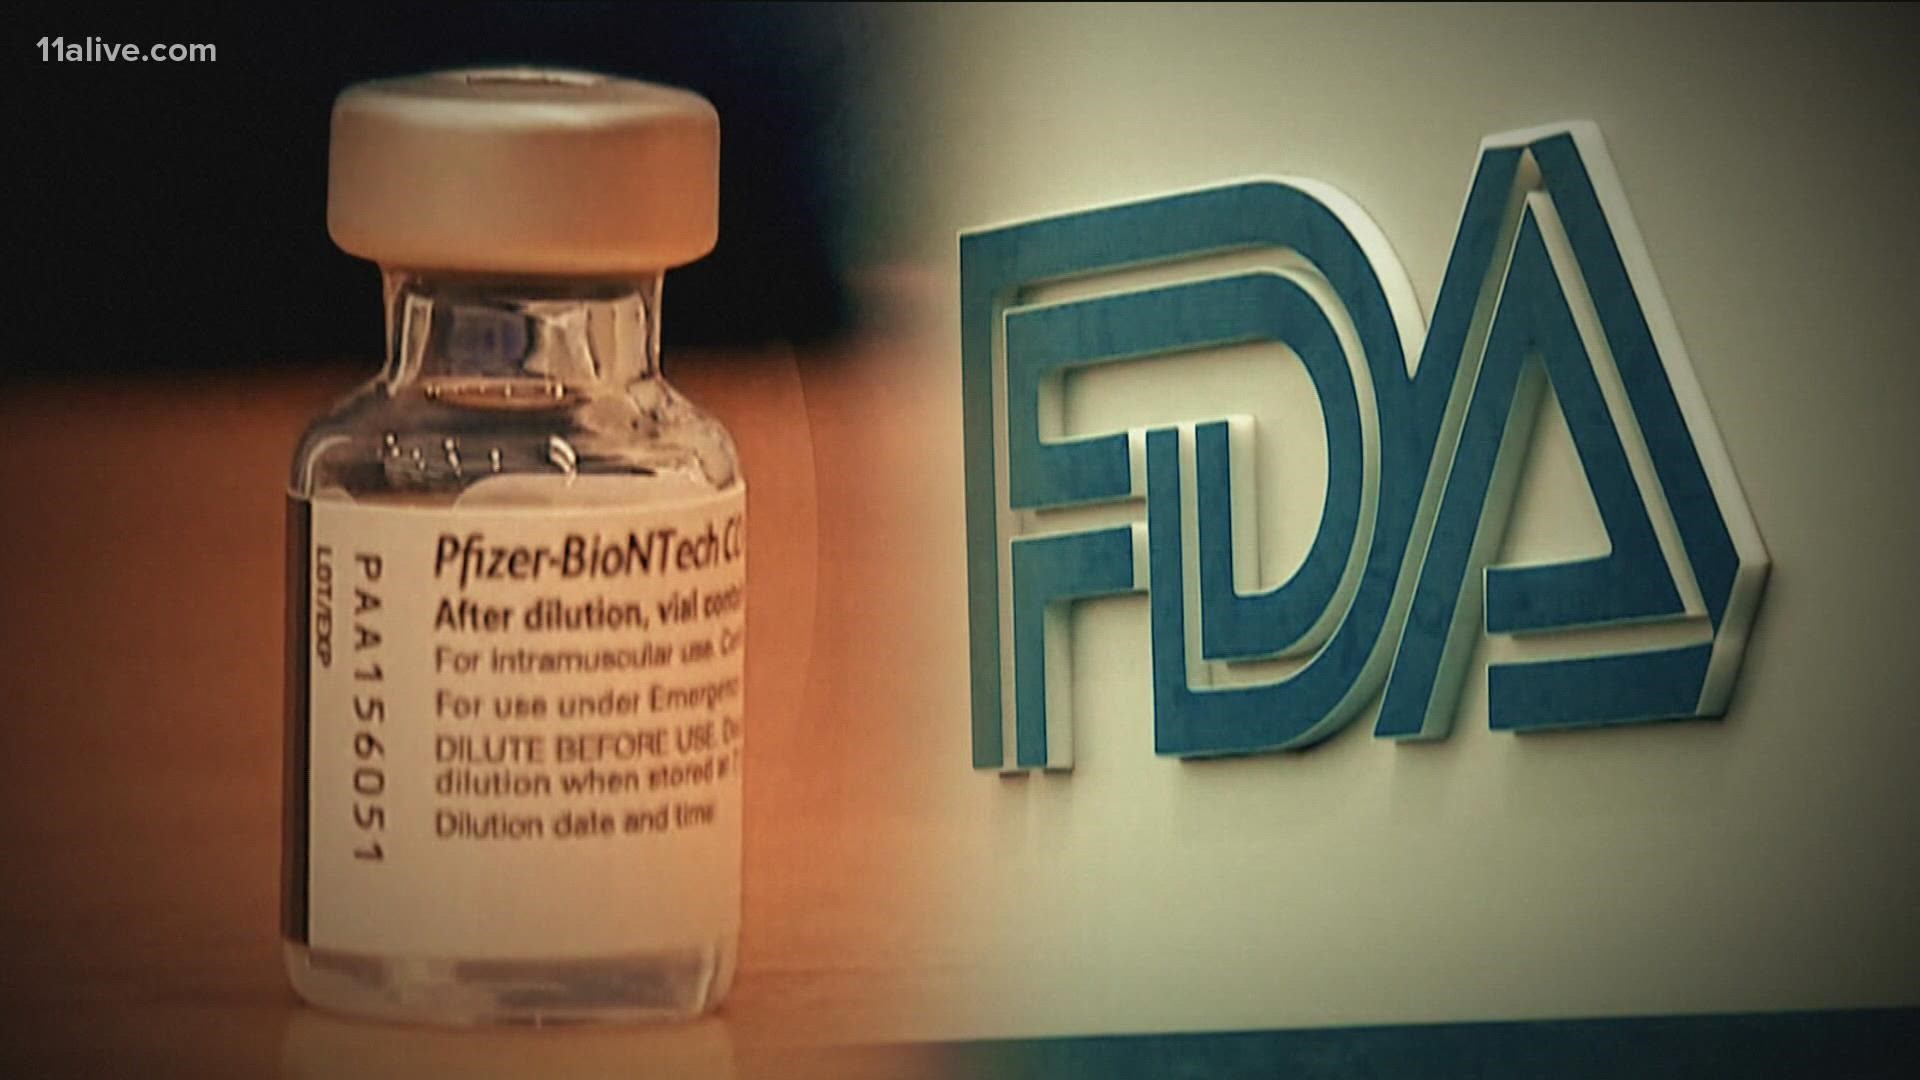 In less than two weeks, the FDA could authorize Pfizer's COVID-19 vaccine for children 5 to 11 years old.